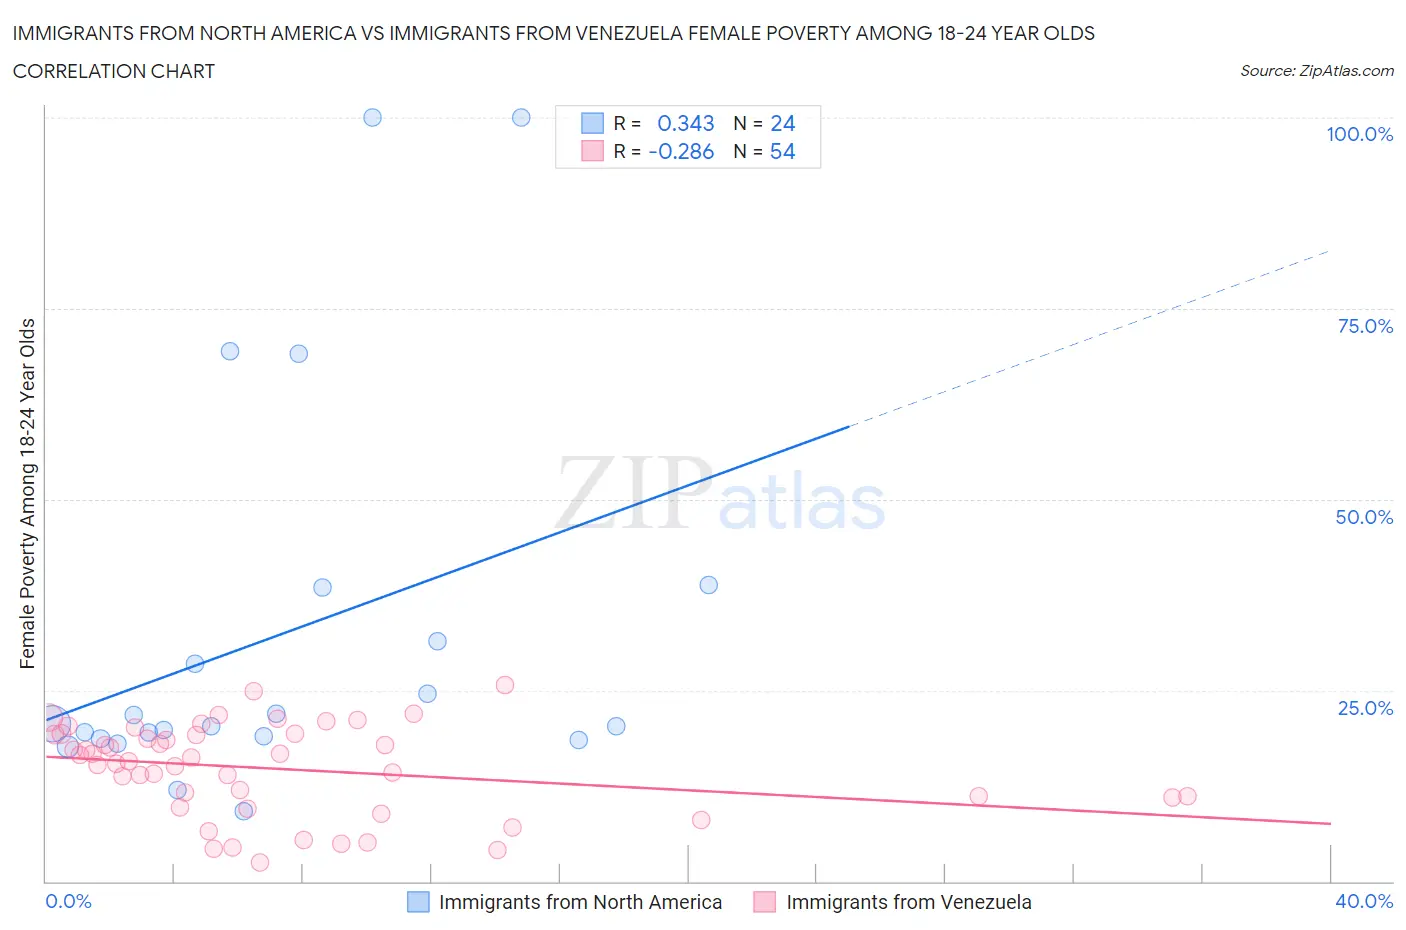 Immigrants from North America vs Immigrants from Venezuela Female Poverty Among 18-24 Year Olds